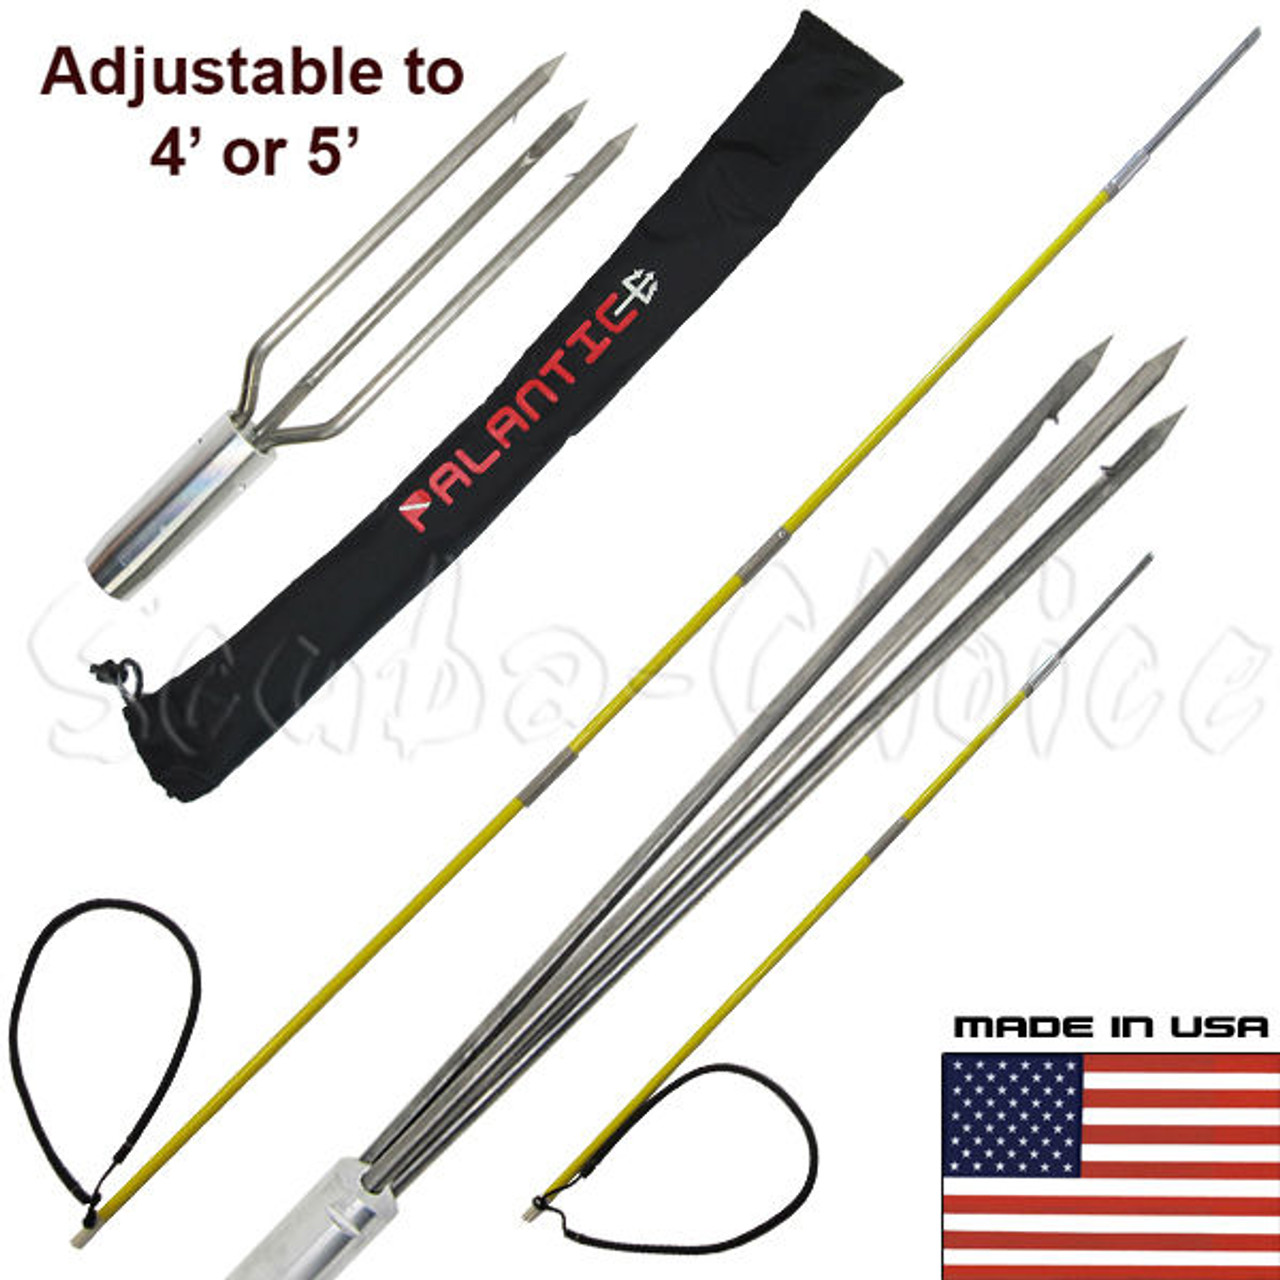 Hawaiian Sling Fishing Spear Set - Travel Fiberglass Pole Spear Harpoon for  Spearfishing with Stainless Steel Single Barb, Lionfish & Paralyzer Tips